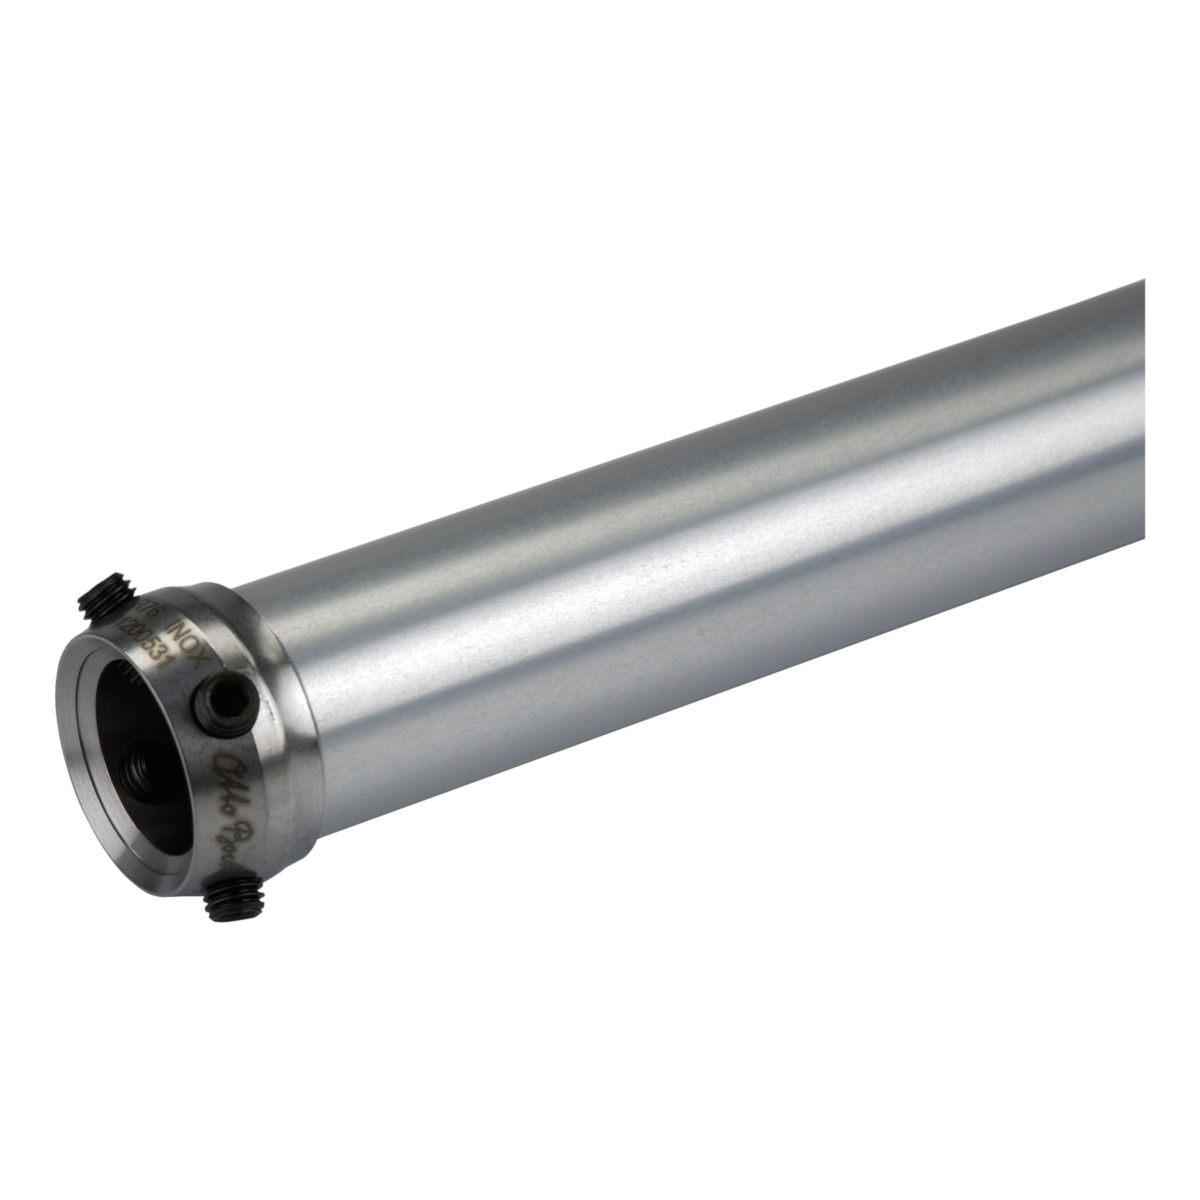 Tube-Adap,Long-34mm-Steel  Adapters / Structural Components